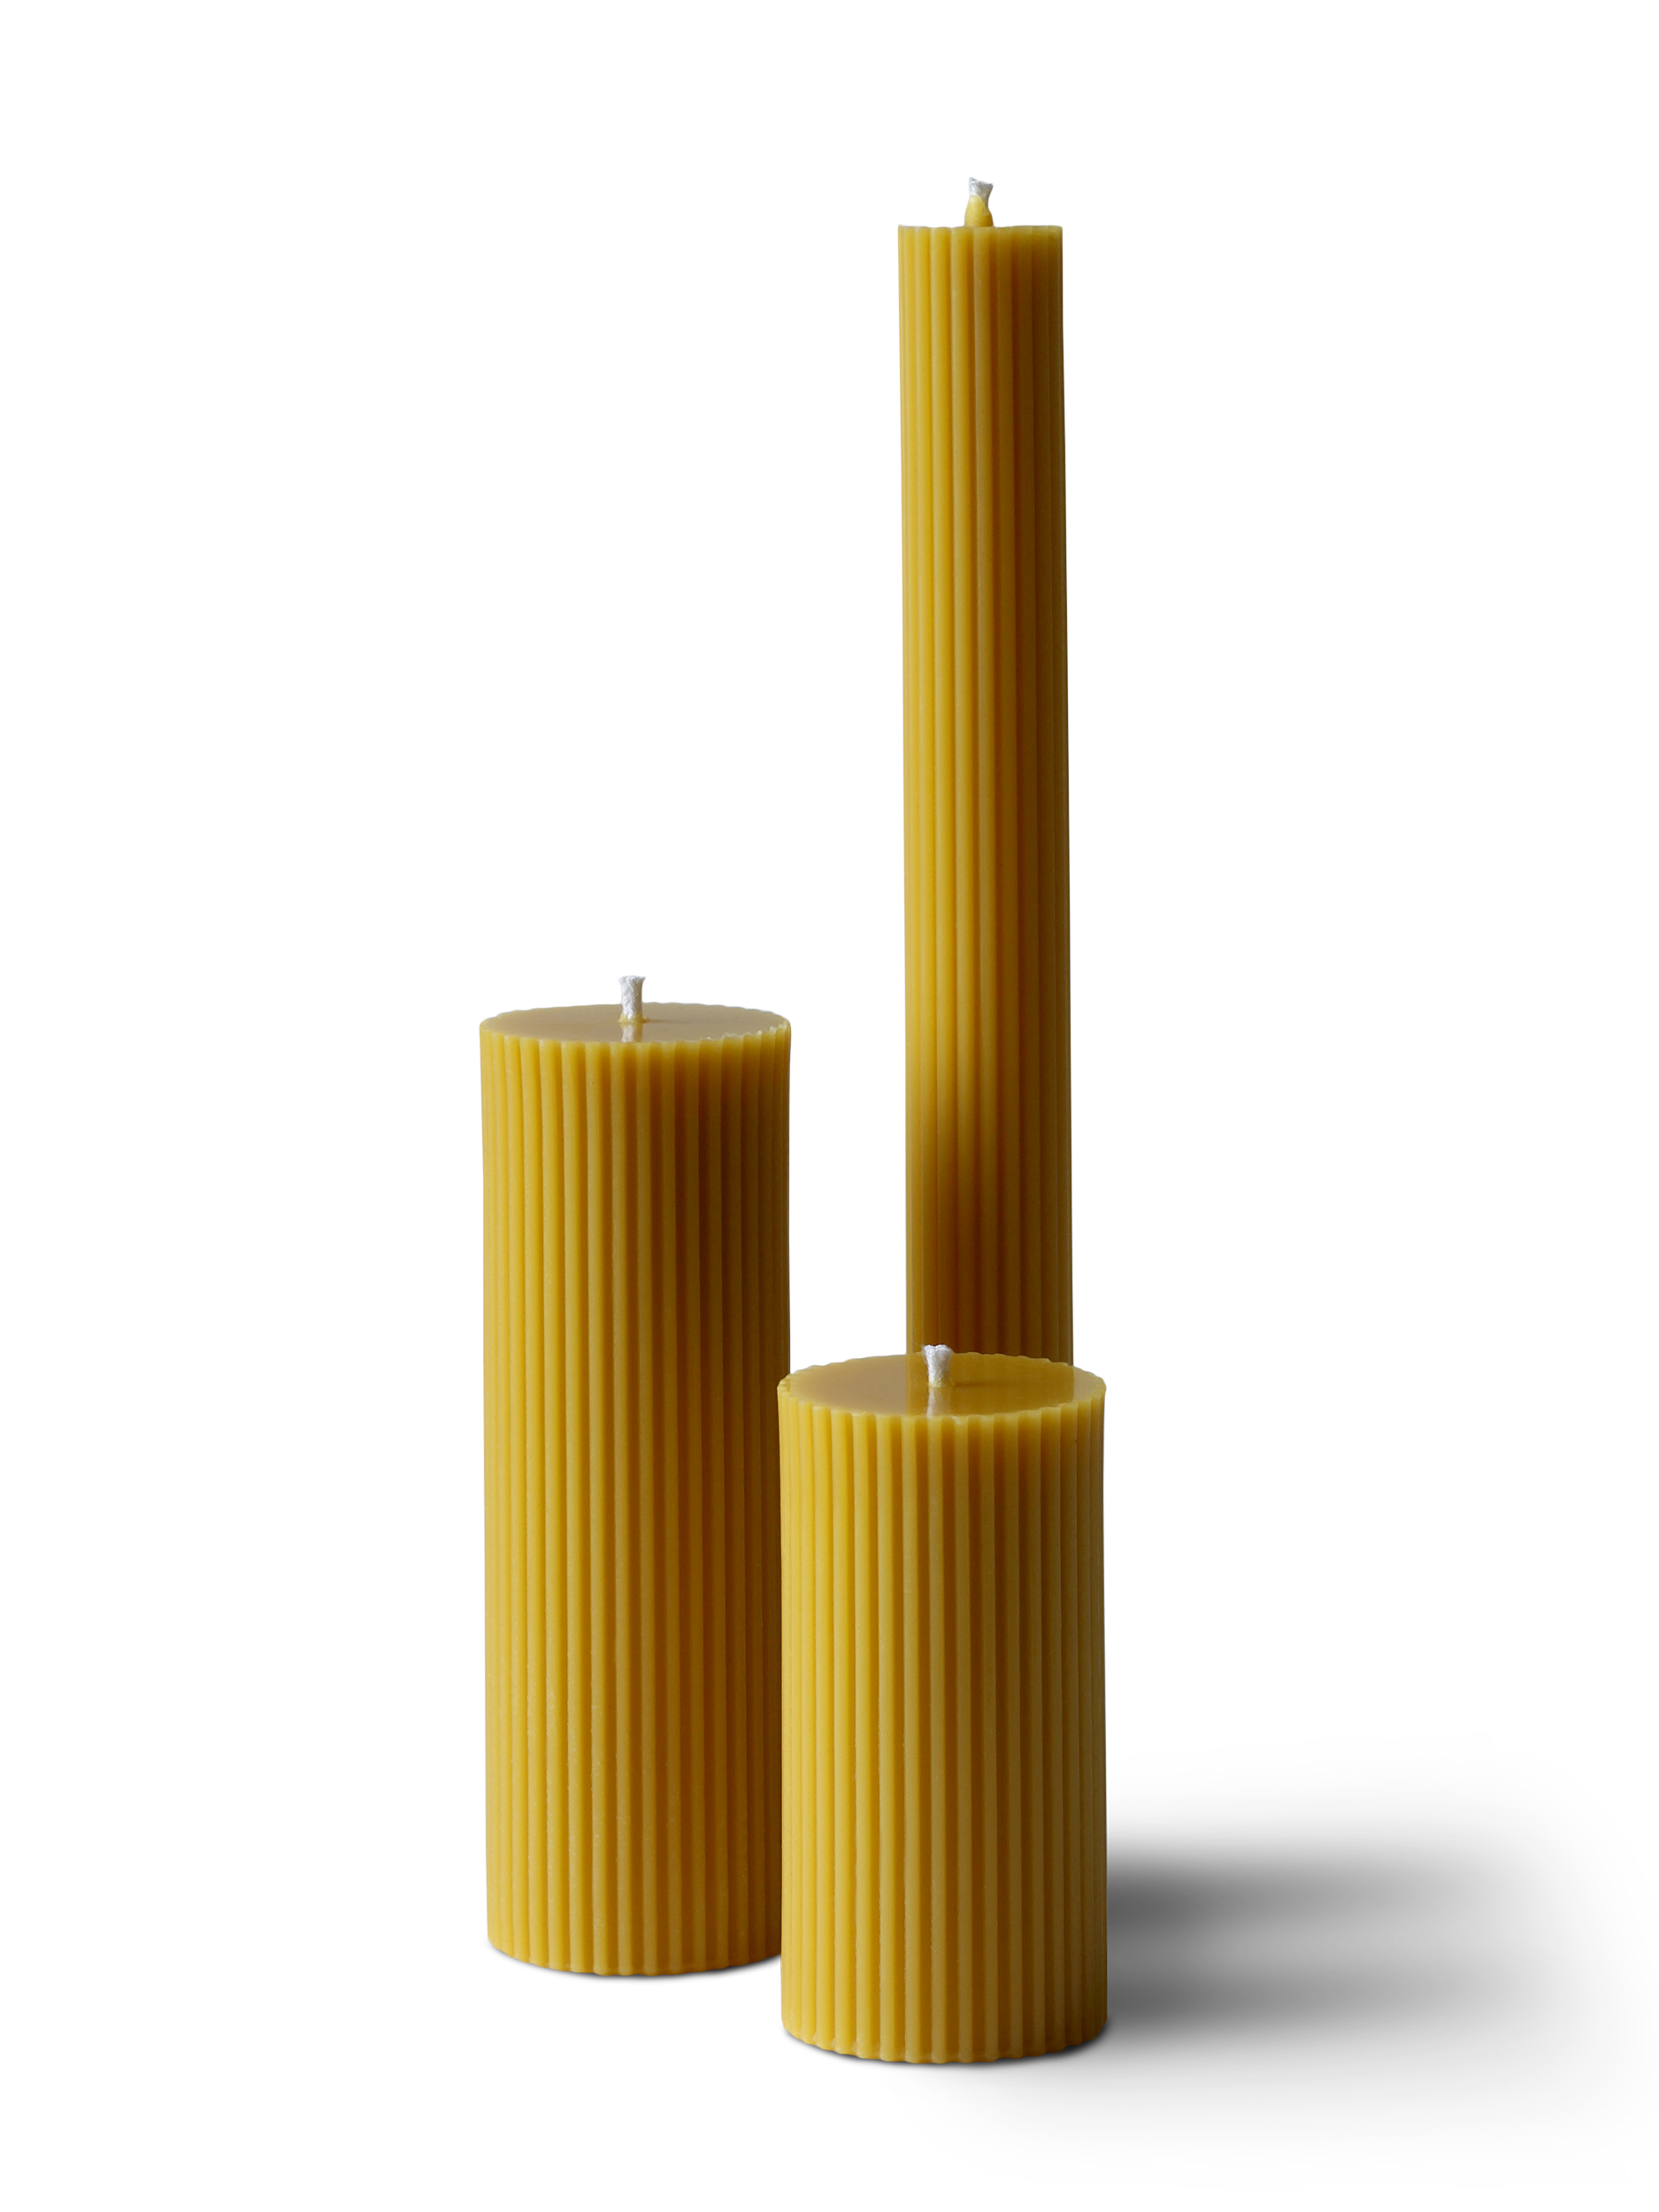 Cylinder Candles,100% Beeswax Natural,Hand Rolled,Pillar Candles Included Yin Yang Selenite Beeswax Candle Holder Honeycomb